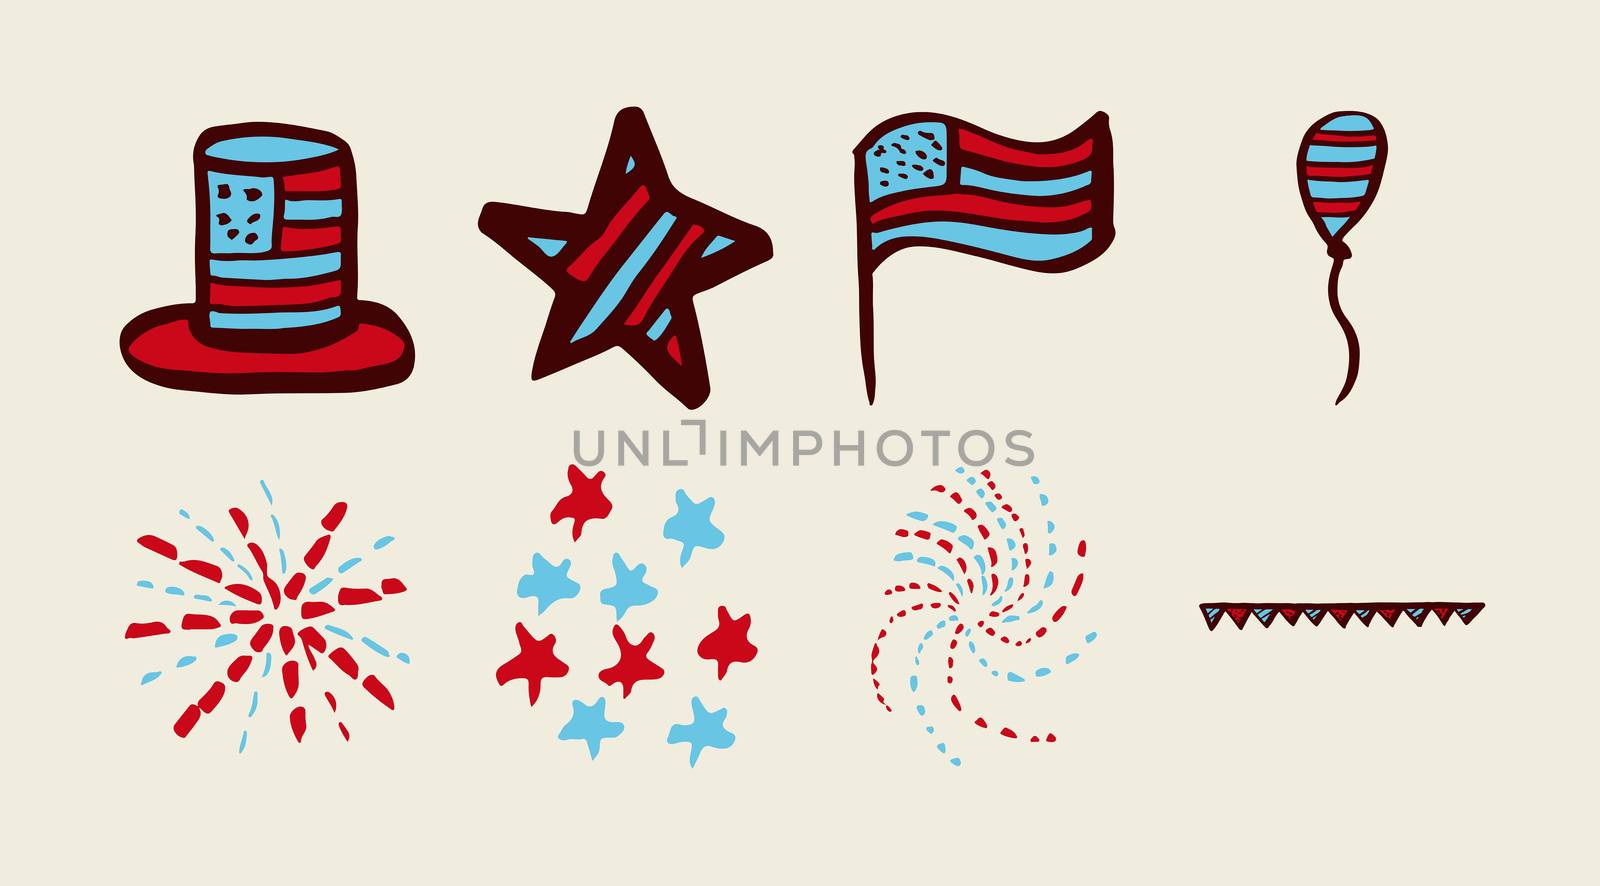 Vector icon of 4th July decoration against green background